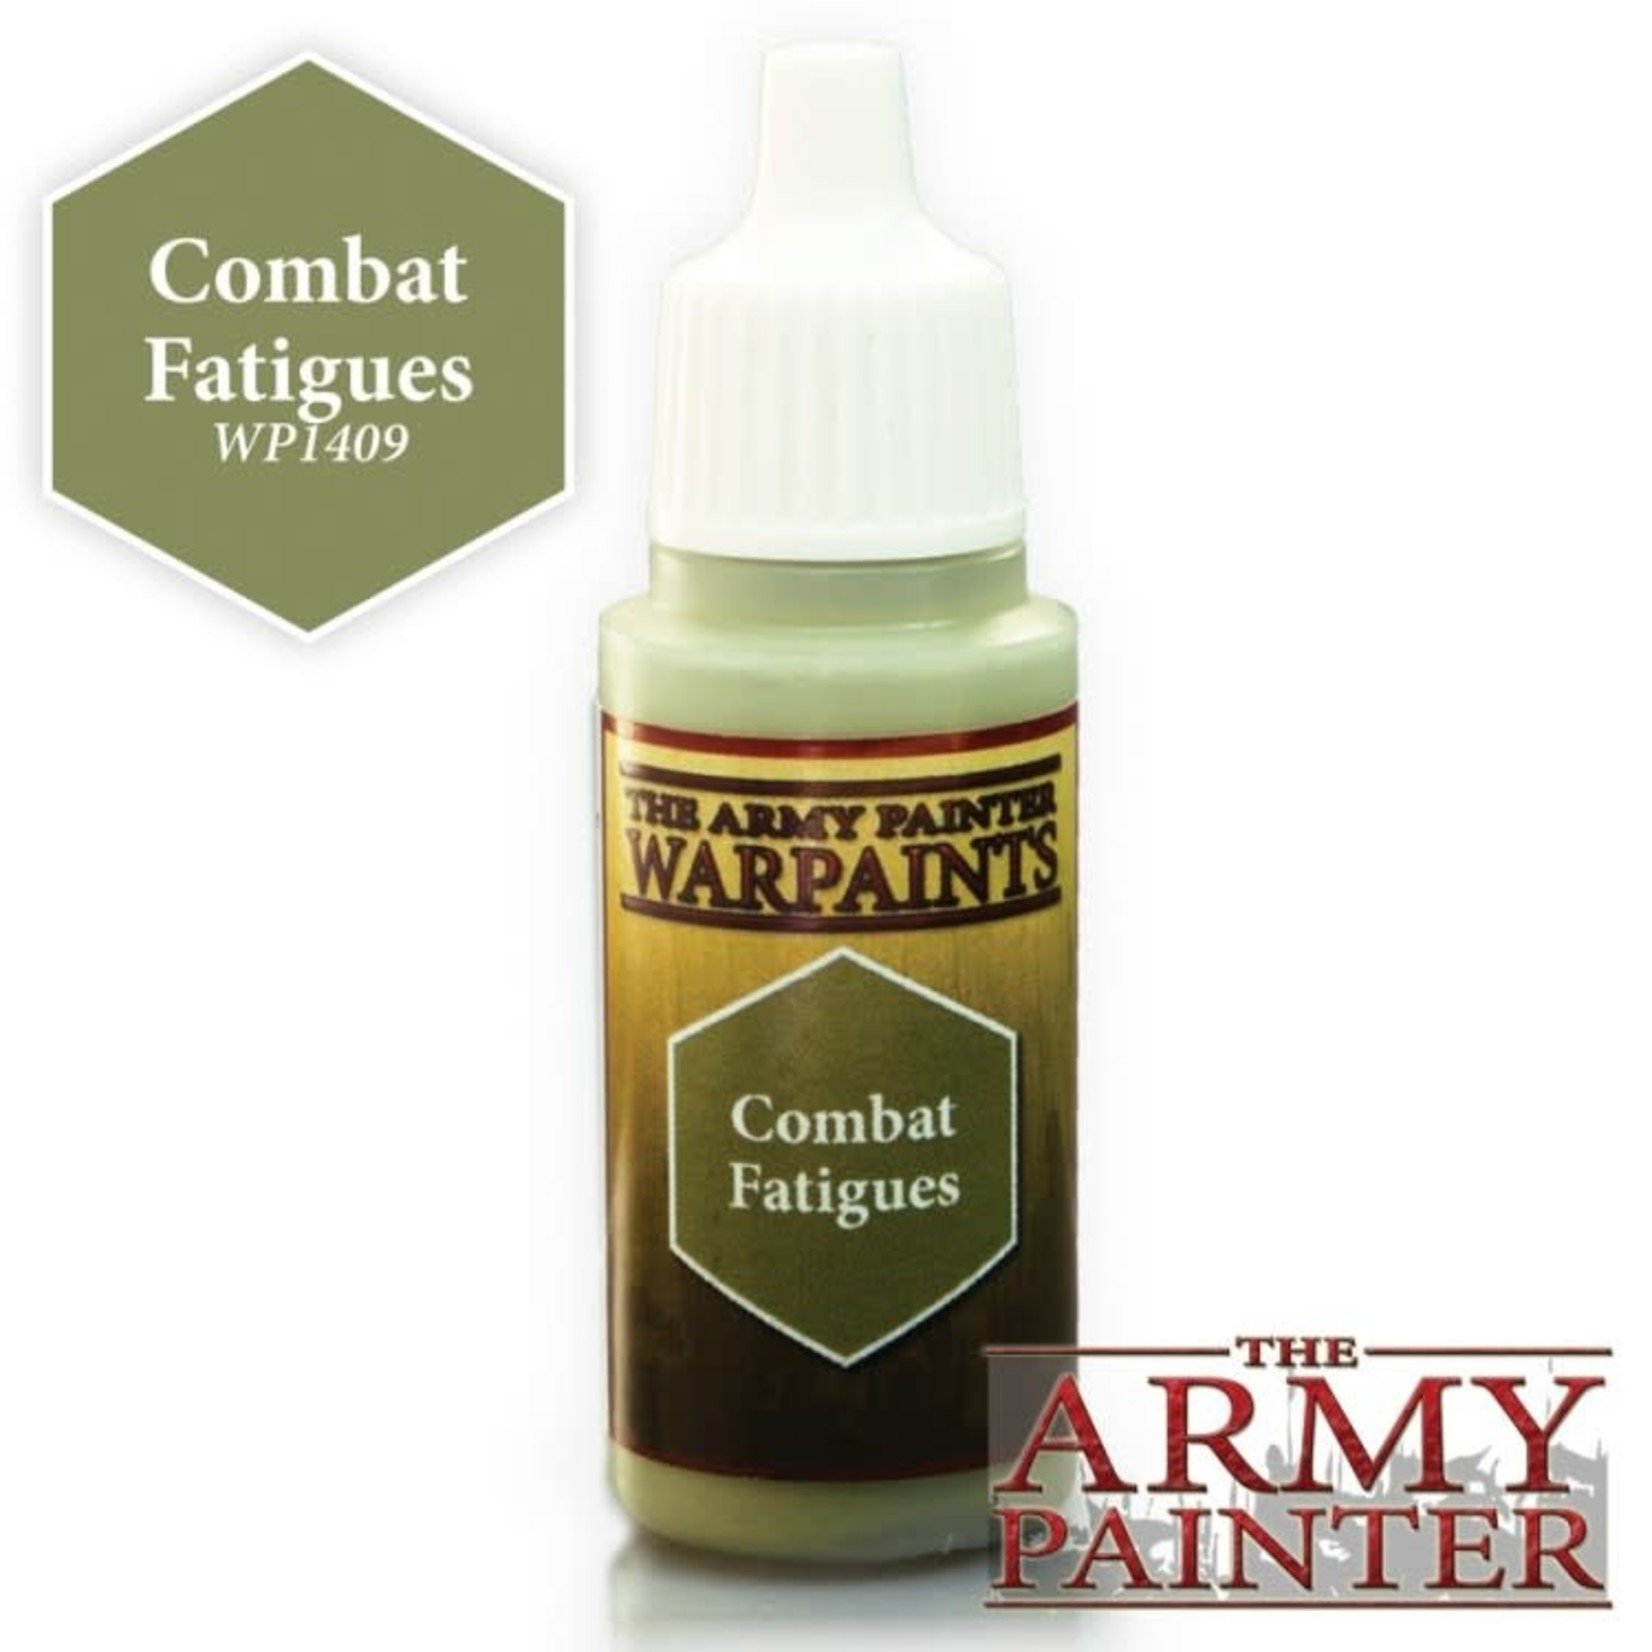 The Army Painter The Army Painter: Warpaints: Combat Fatigues